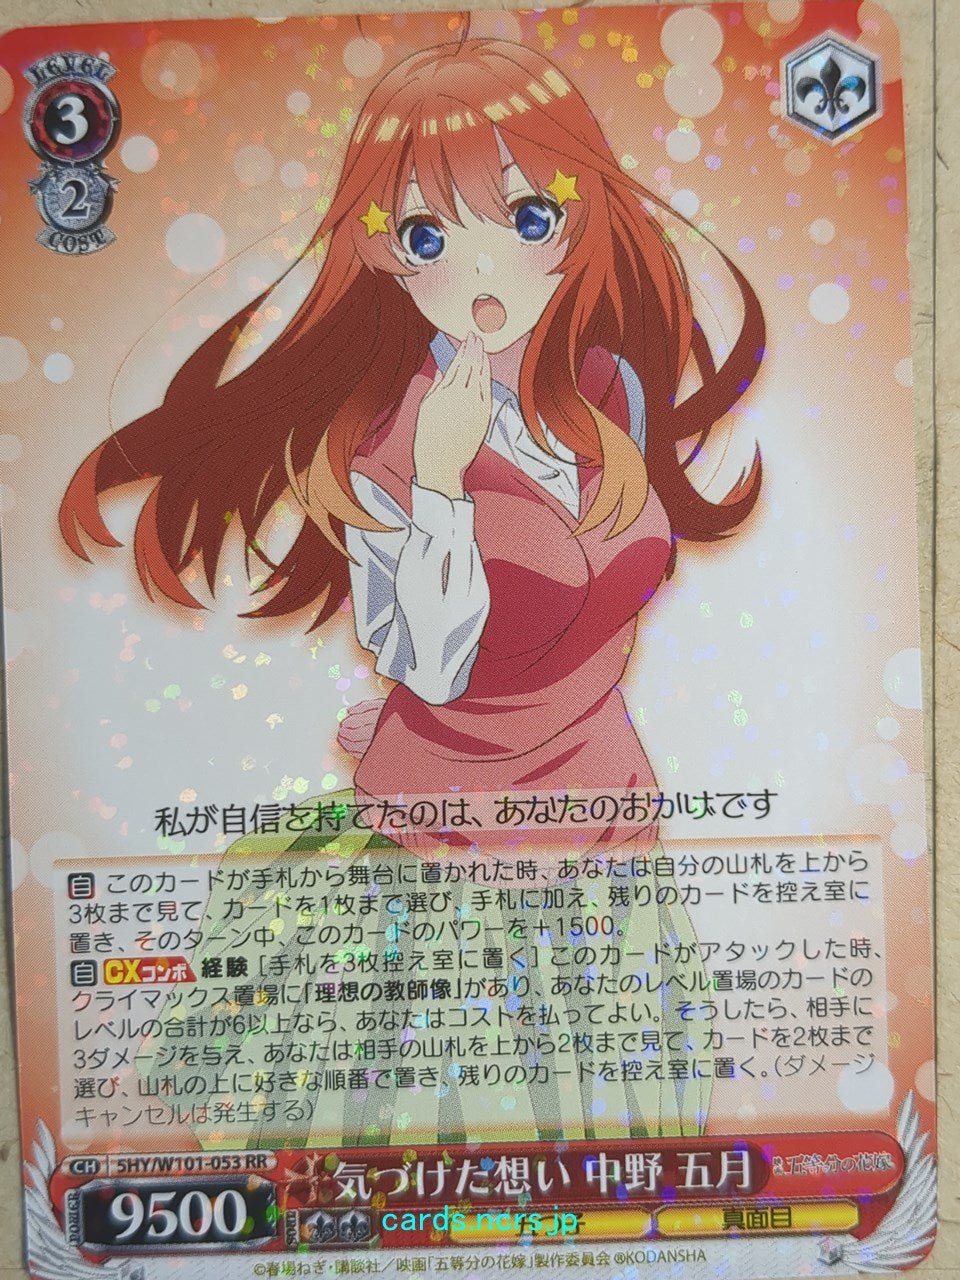 Weiss Schwarz The Quintessential Quintuplets -Itsuki Nakano-   Trading Card 5HY/W101-053RR